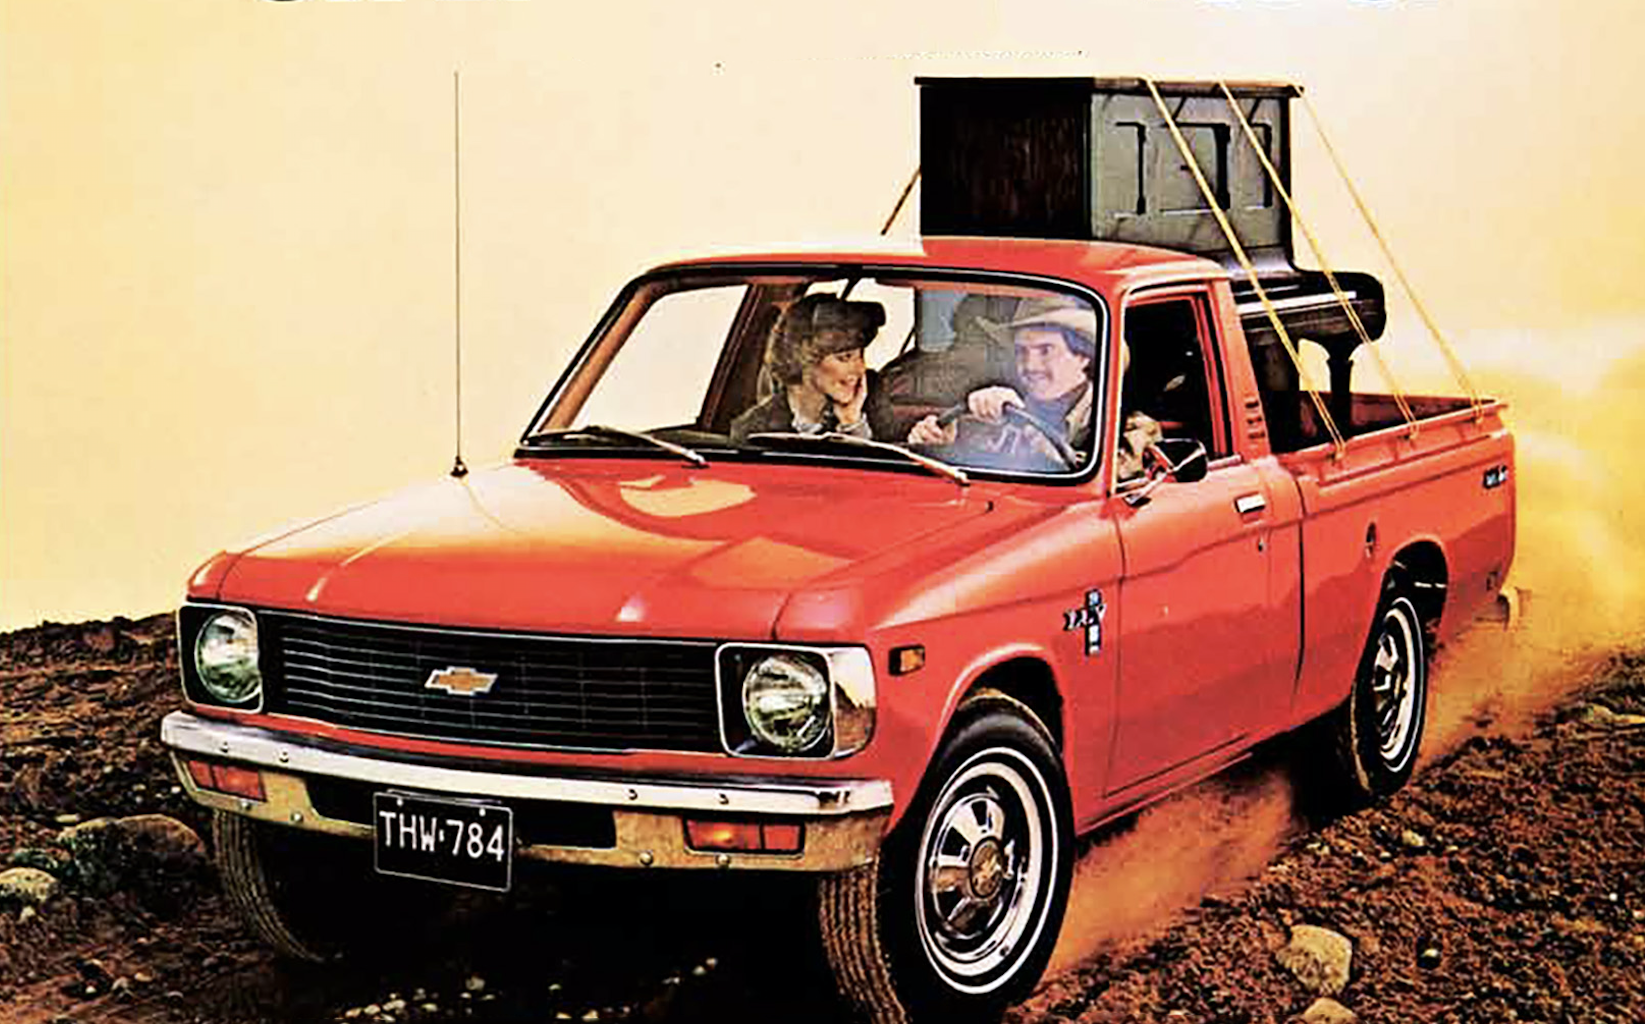 A Gallery of Small-Truck Ads